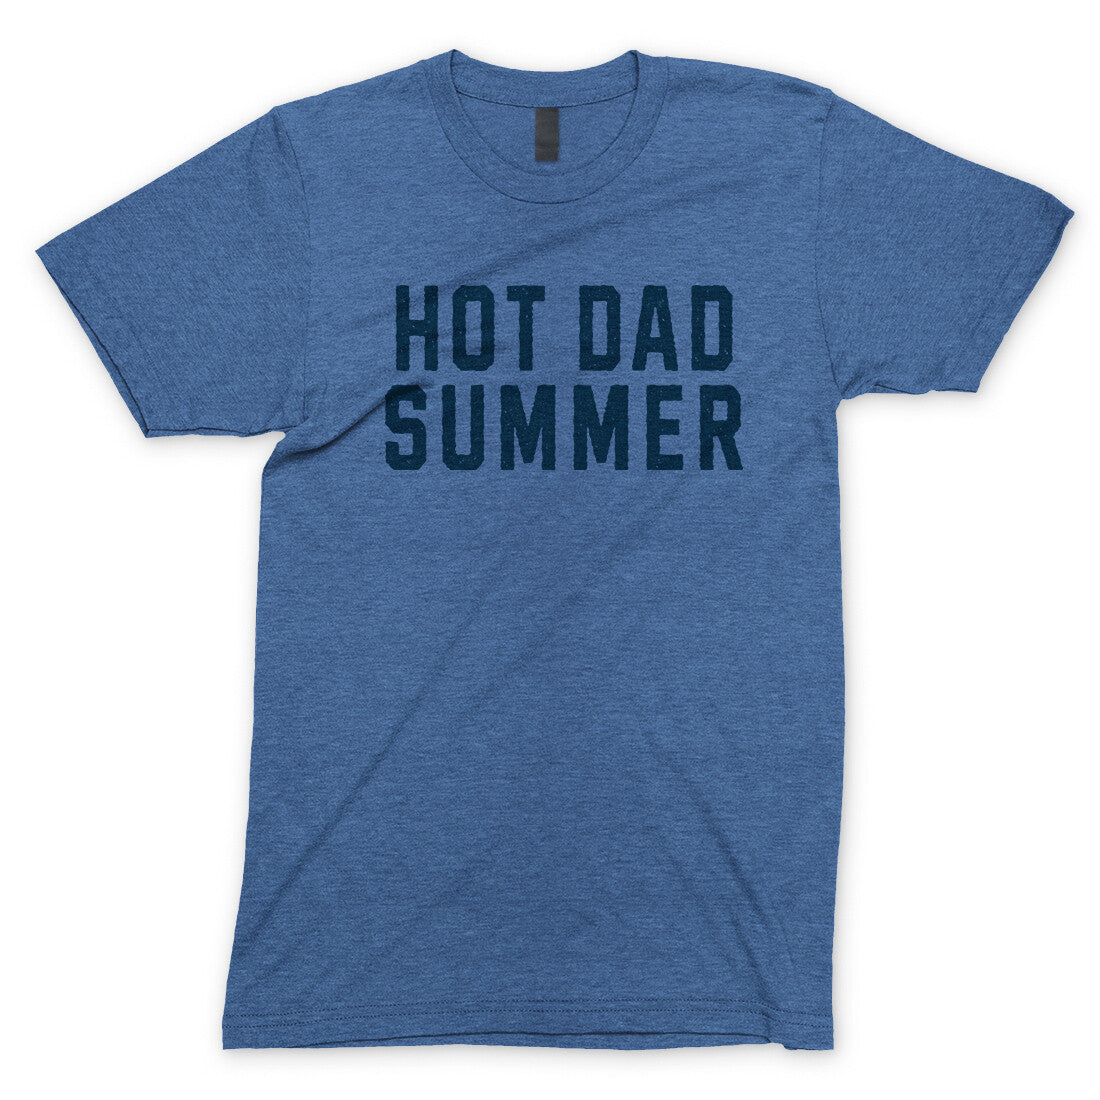 Hot Dad Summer in Heather Royal Color